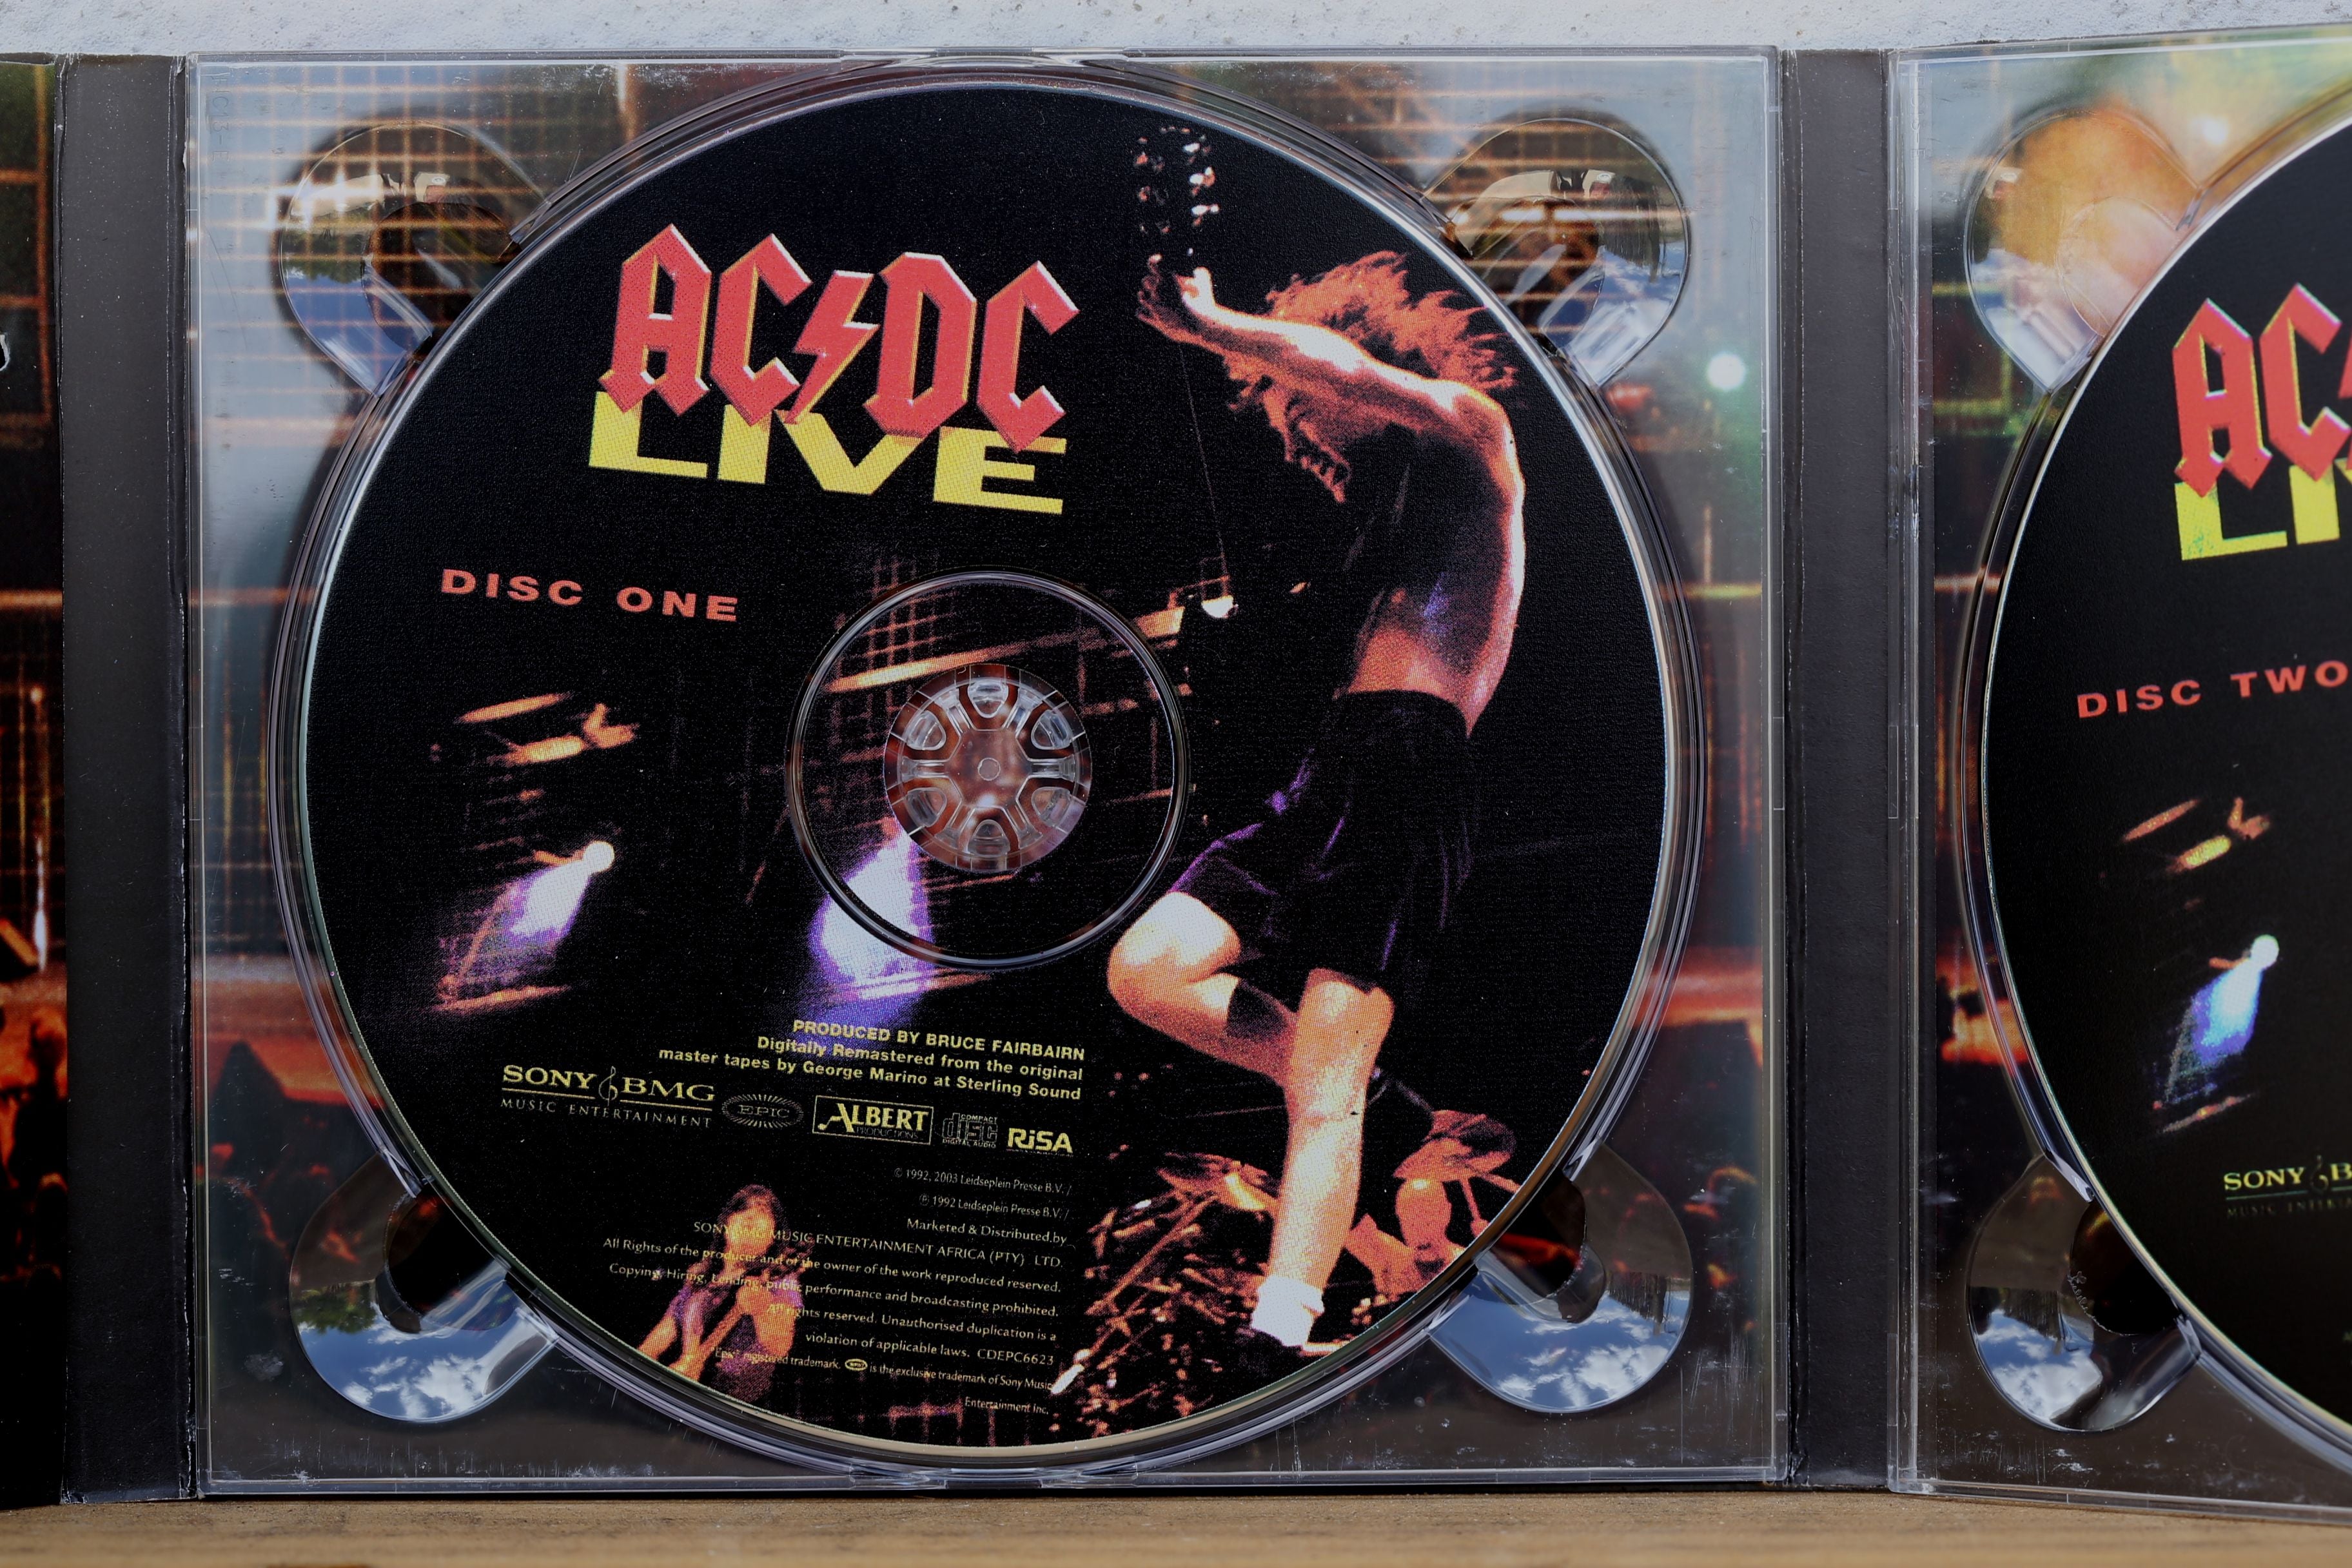 AC/DC - Live (2cd collector's edition) – R62 Music Store